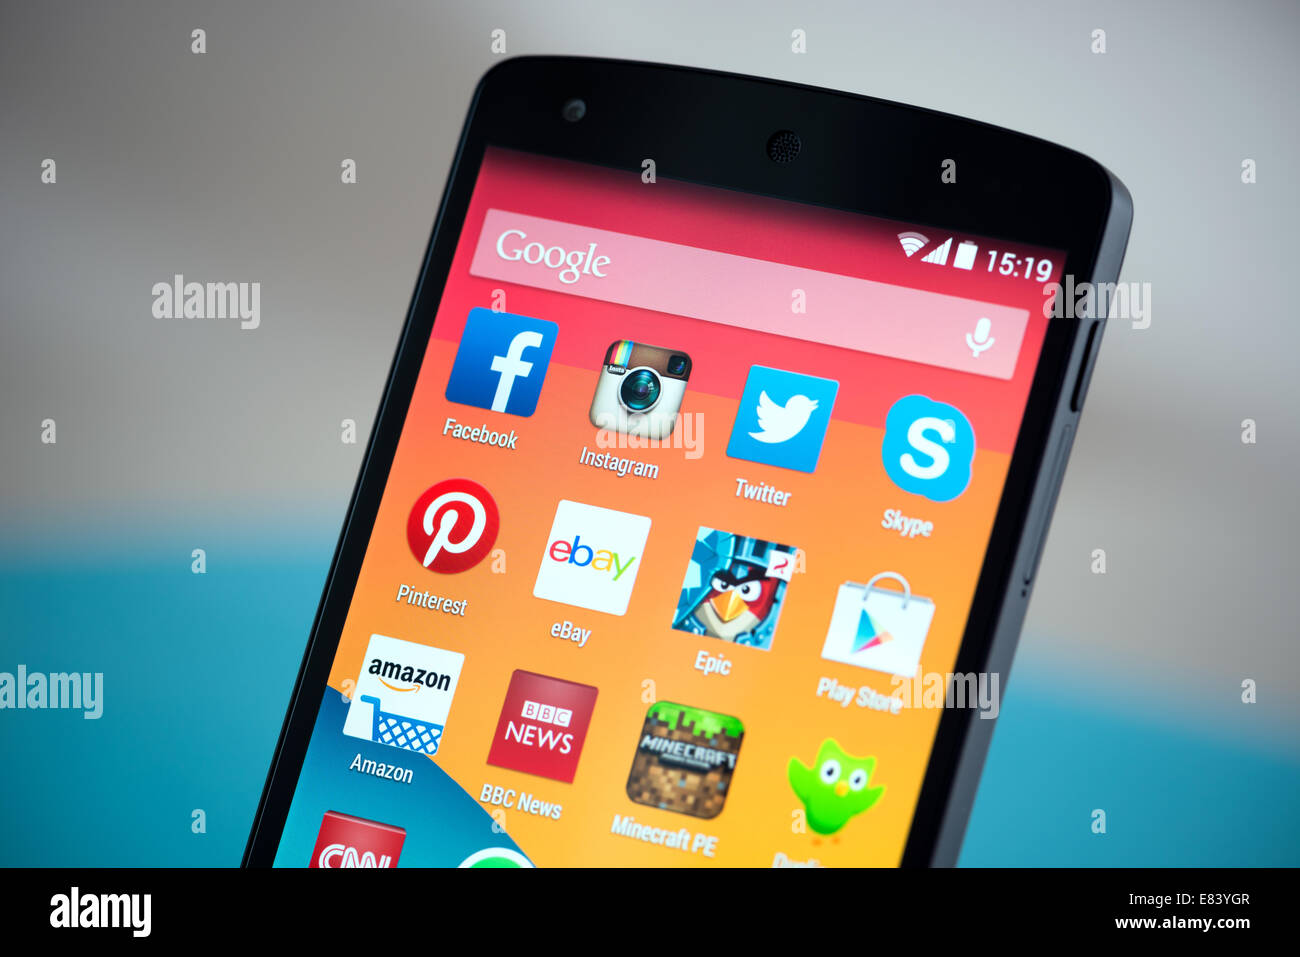 Close-up shot of brand new Google Nexus 5, powered by Android 4.4 version, with various mobile applications on a screen. Stock Photo